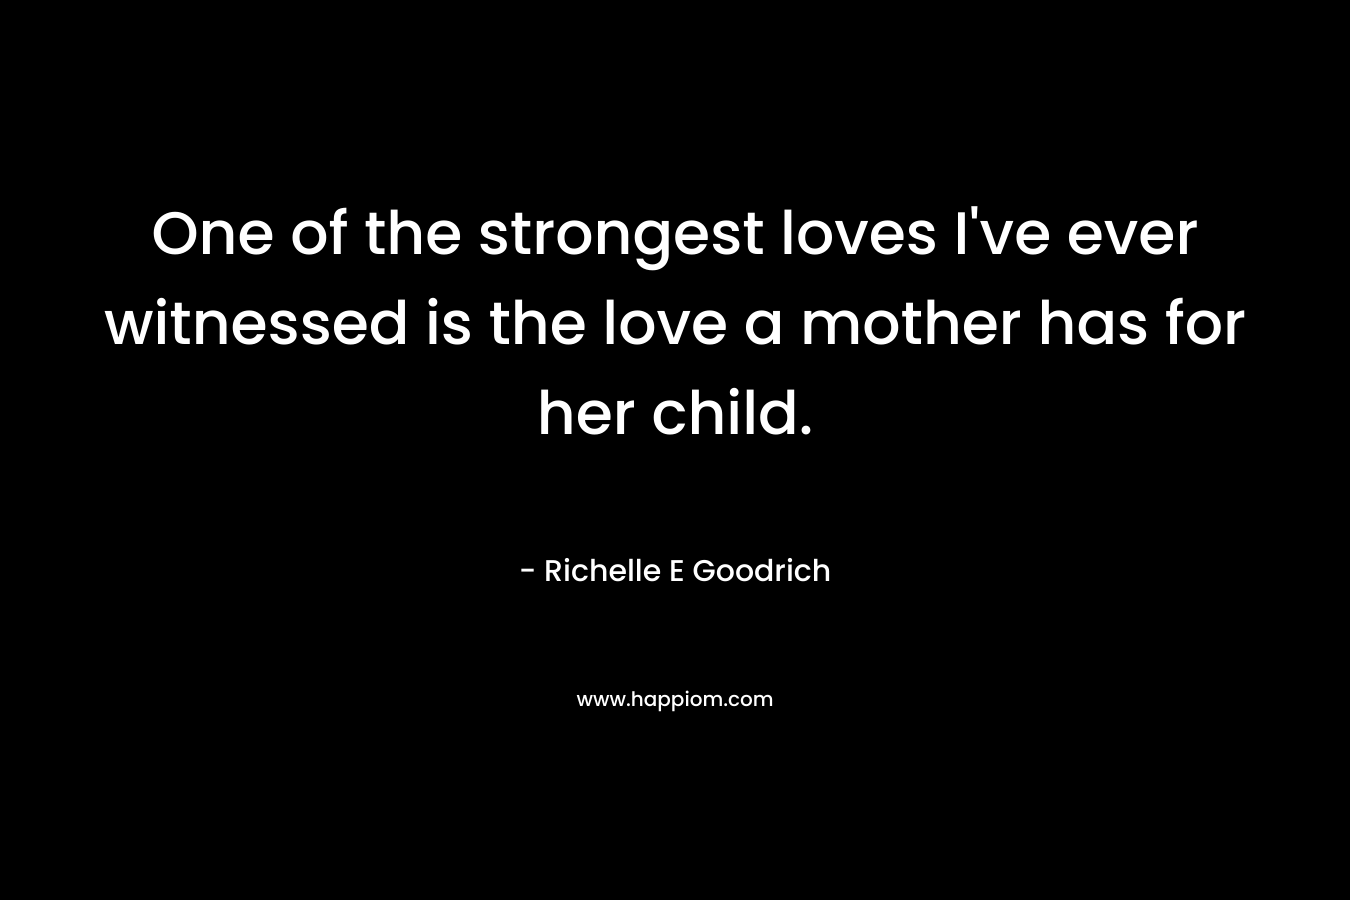 One of the strongest loves I’ve ever witnessed is the love a mother has for her child. – Richelle E Goodrich